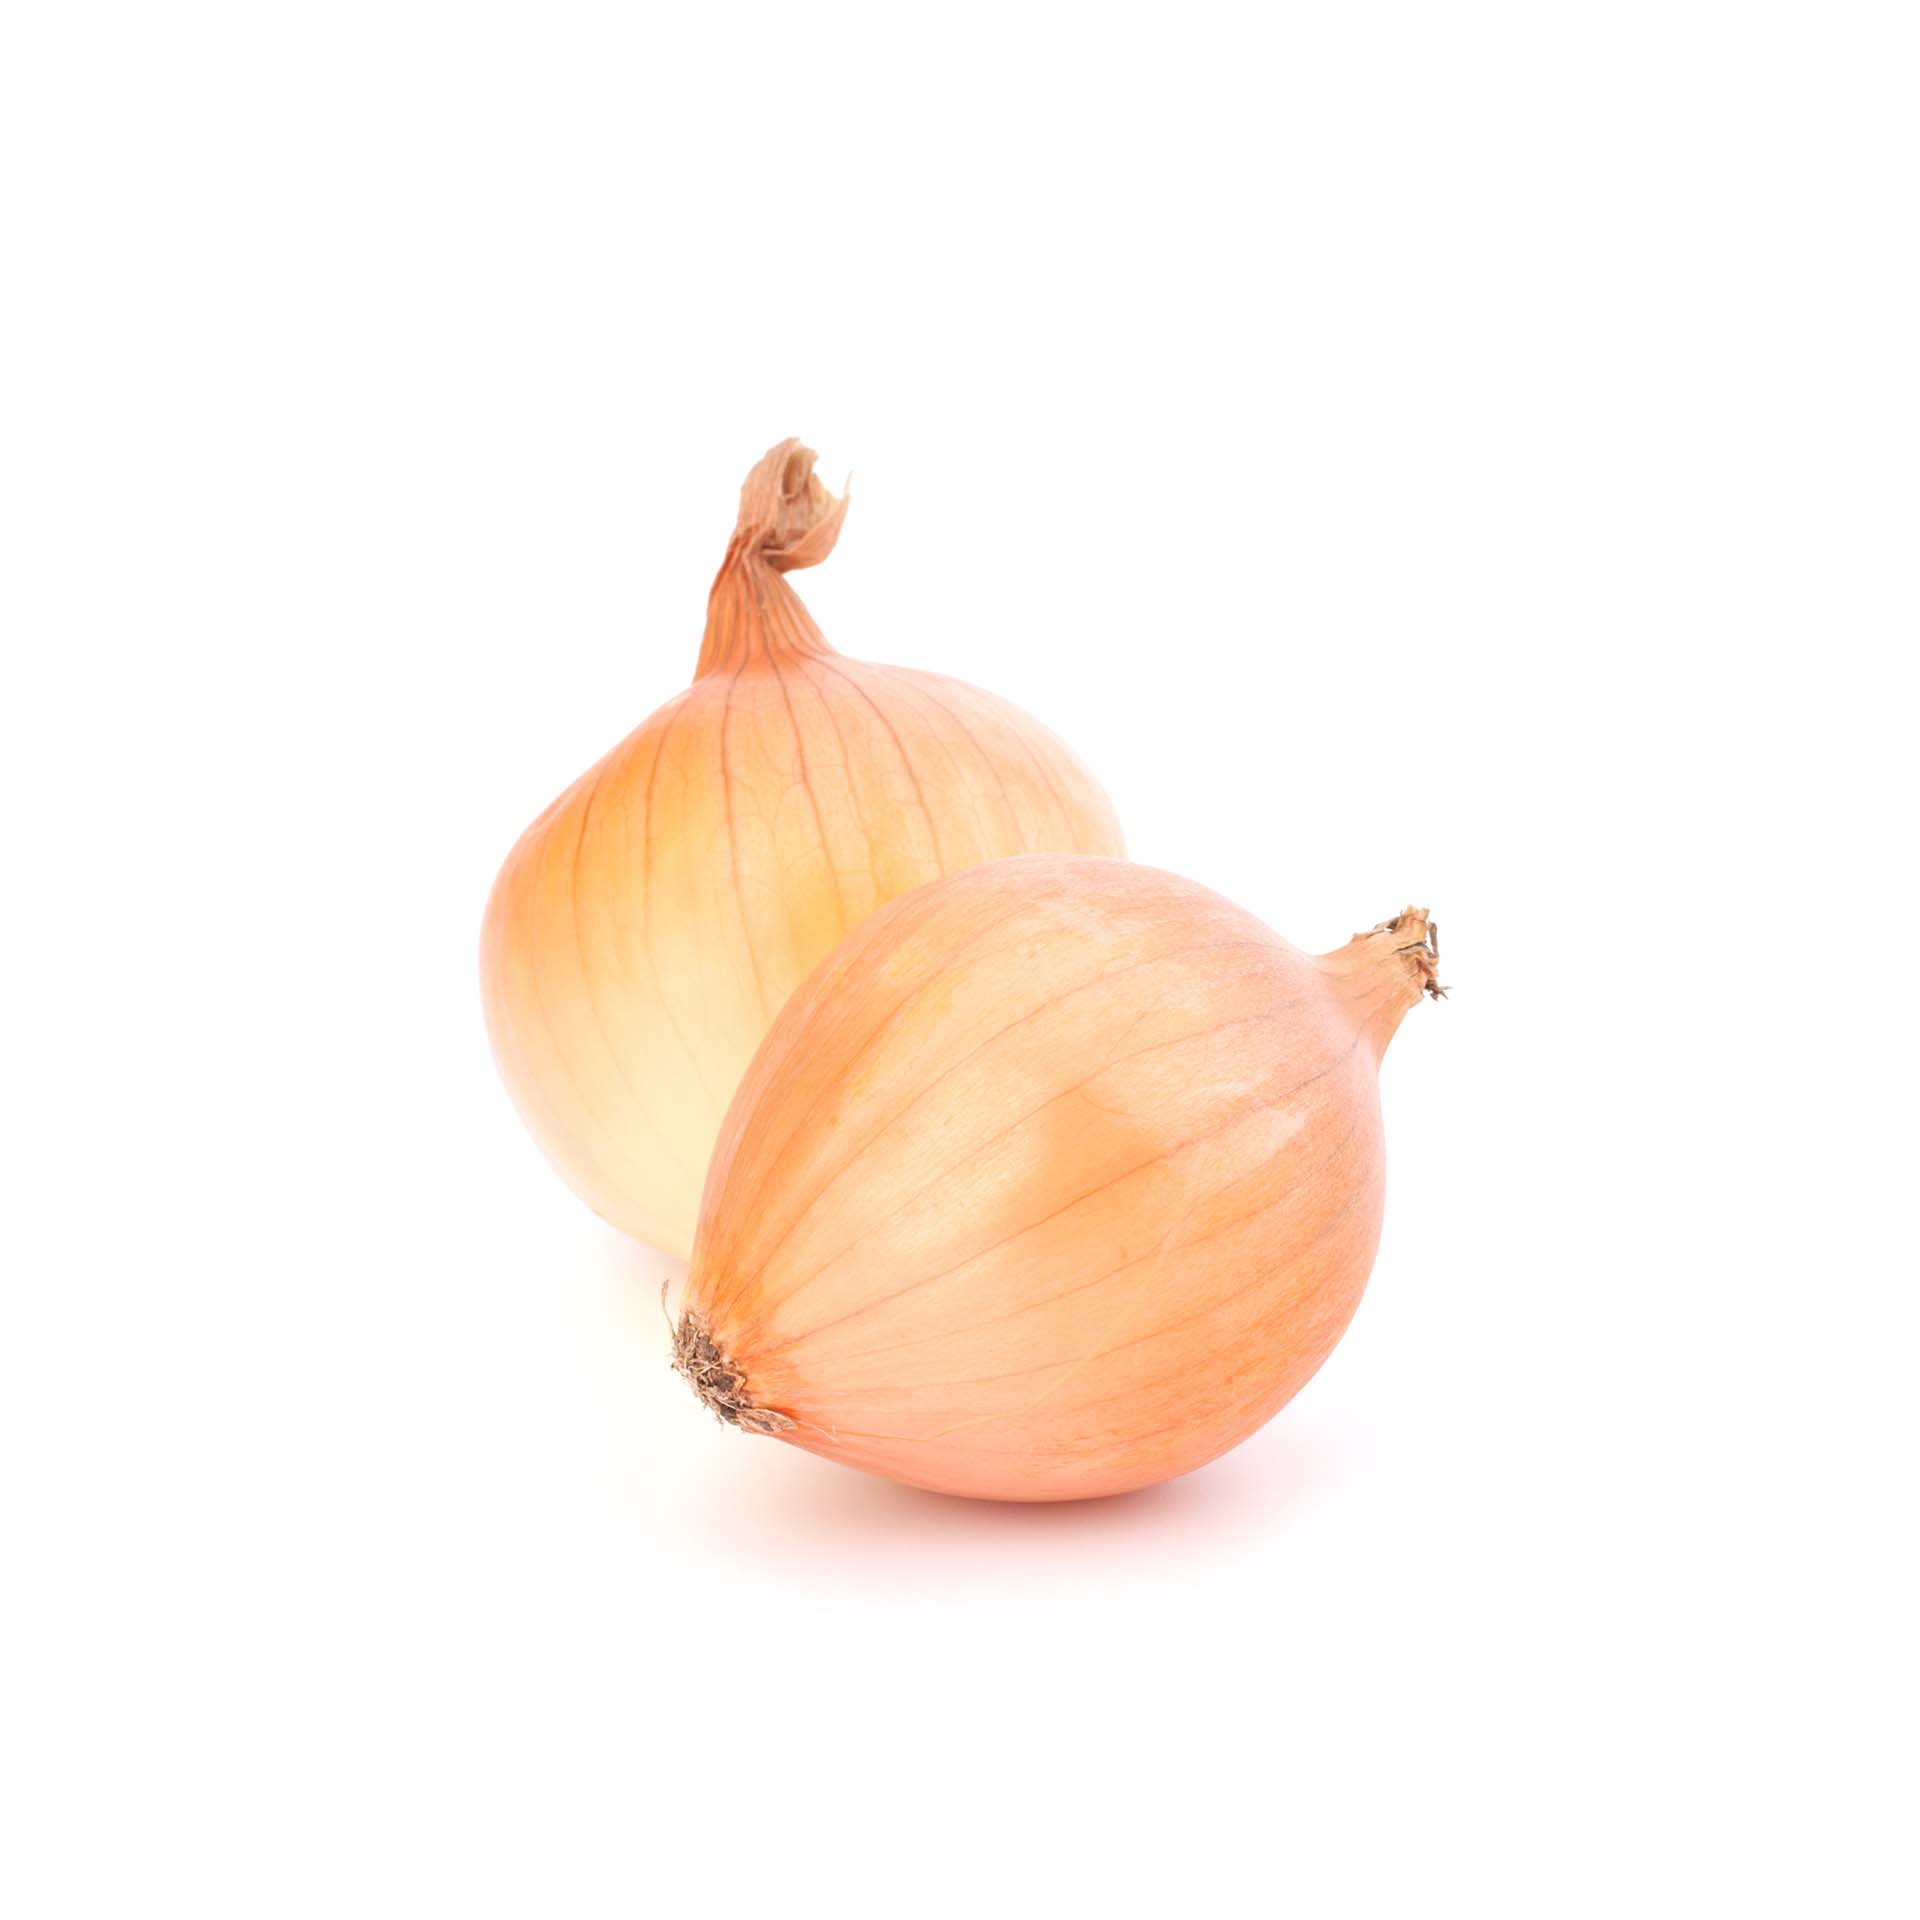 Picture pf onions